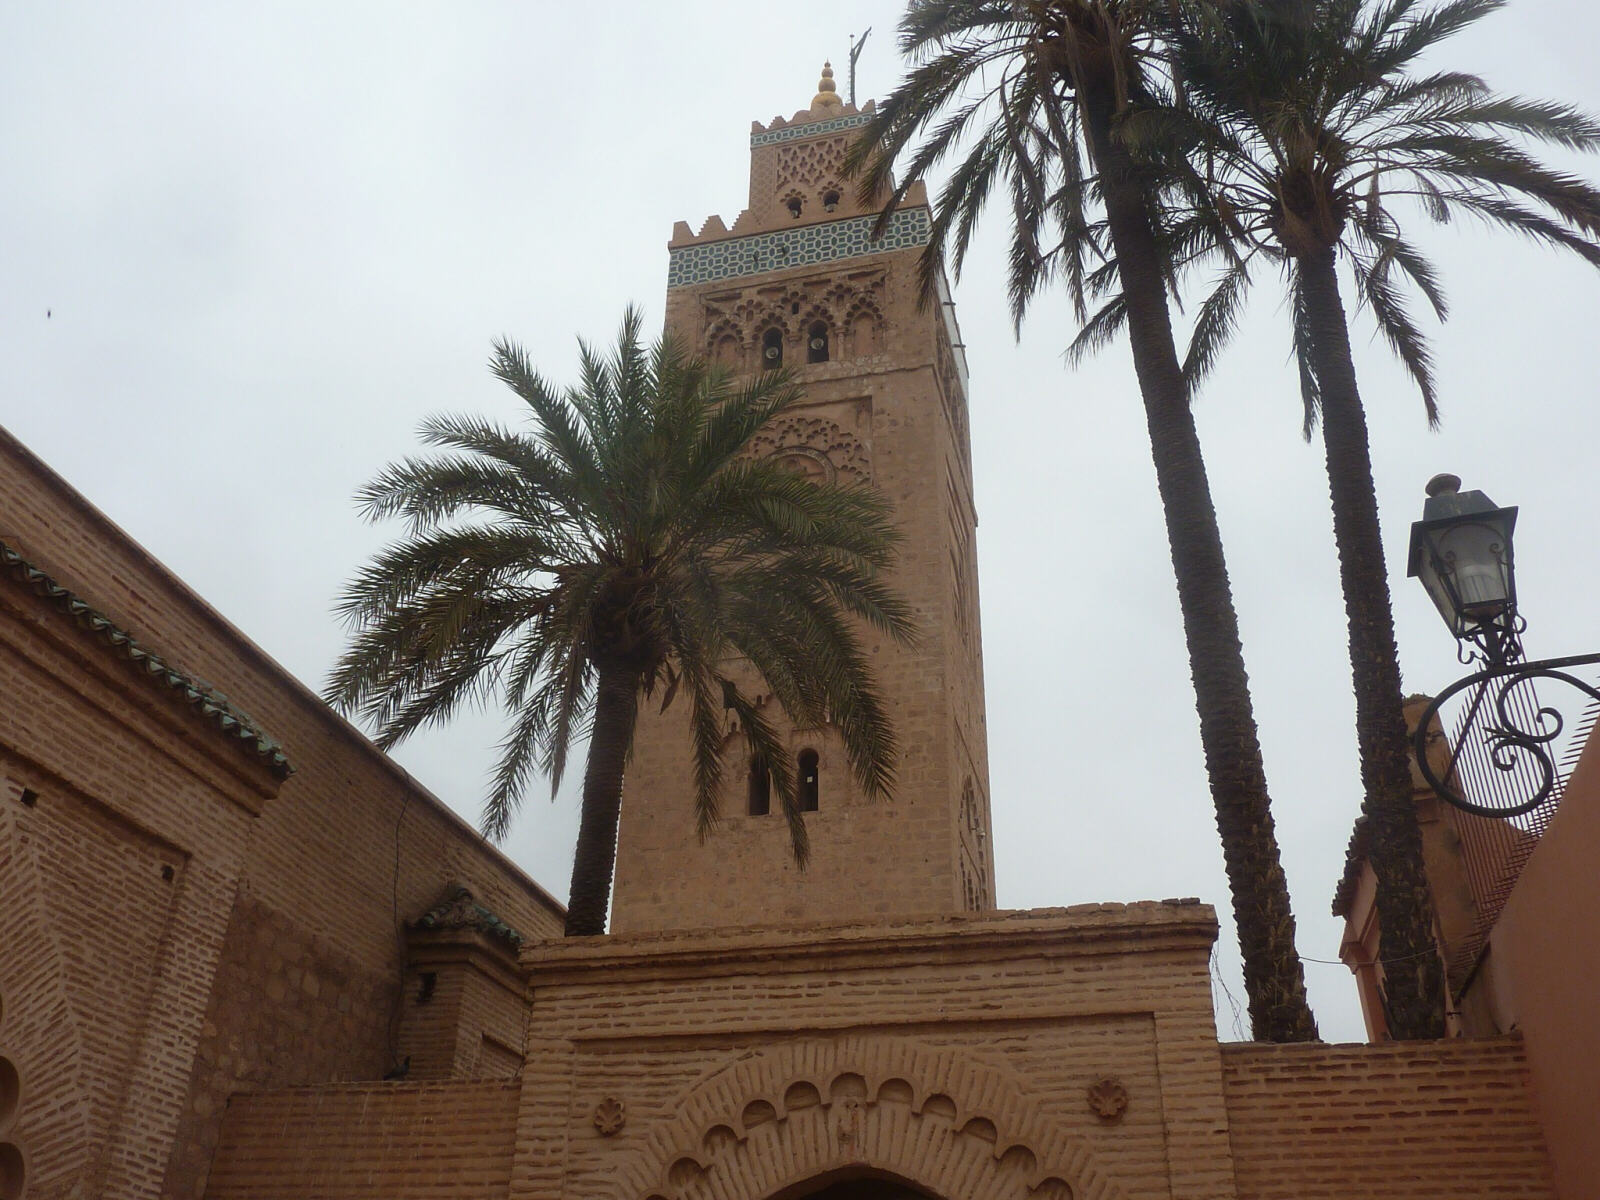 Minaret of the Koutoubia mosque in Marrakech